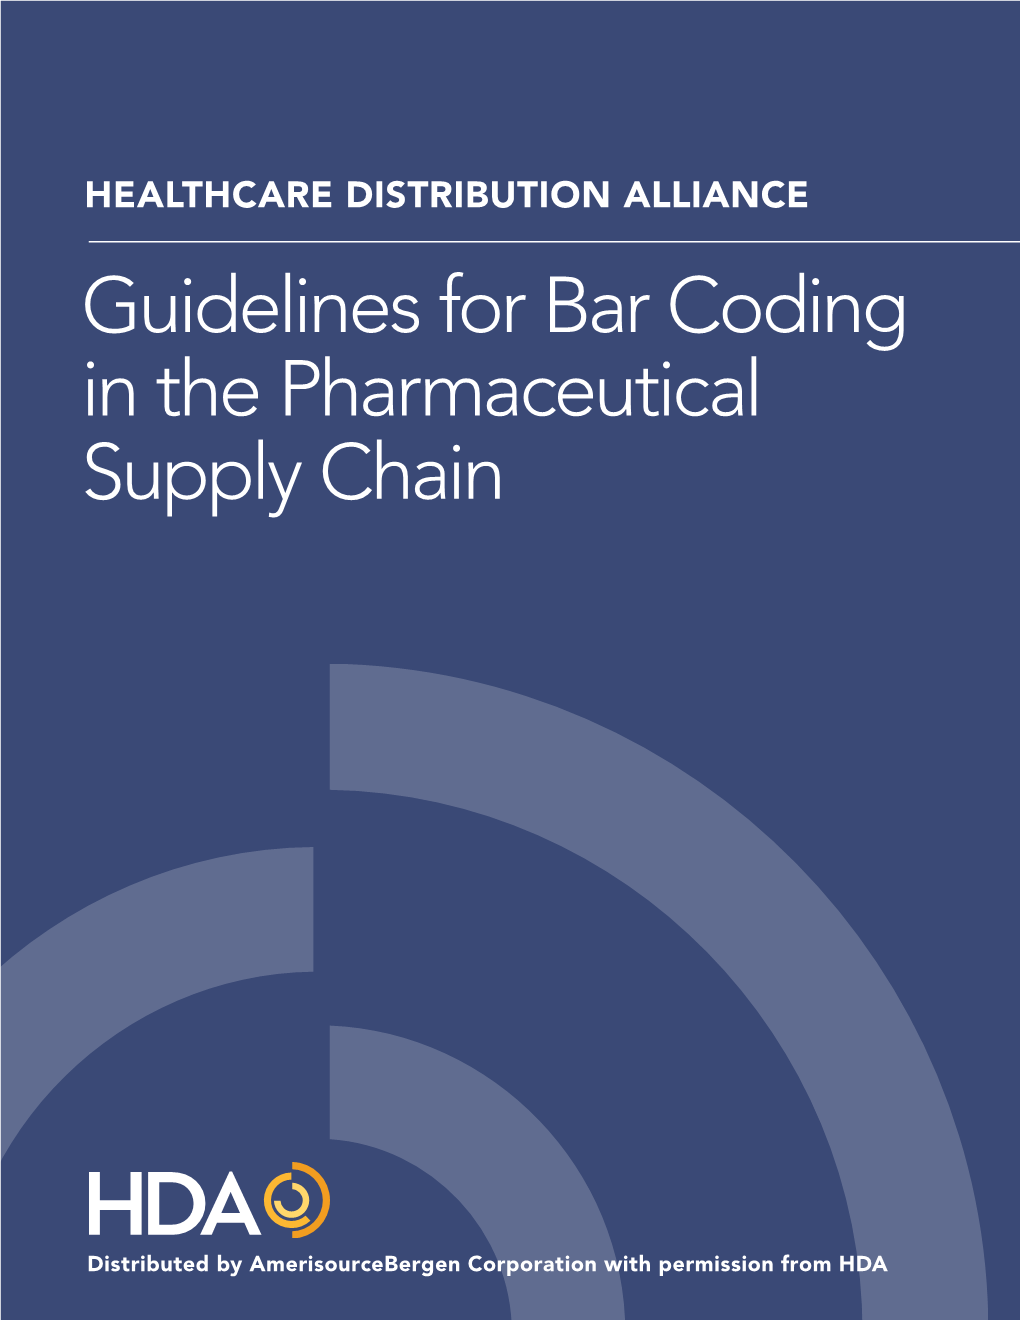 Guidelines for Bar Coding in the Pharmaceutical Supply Chain